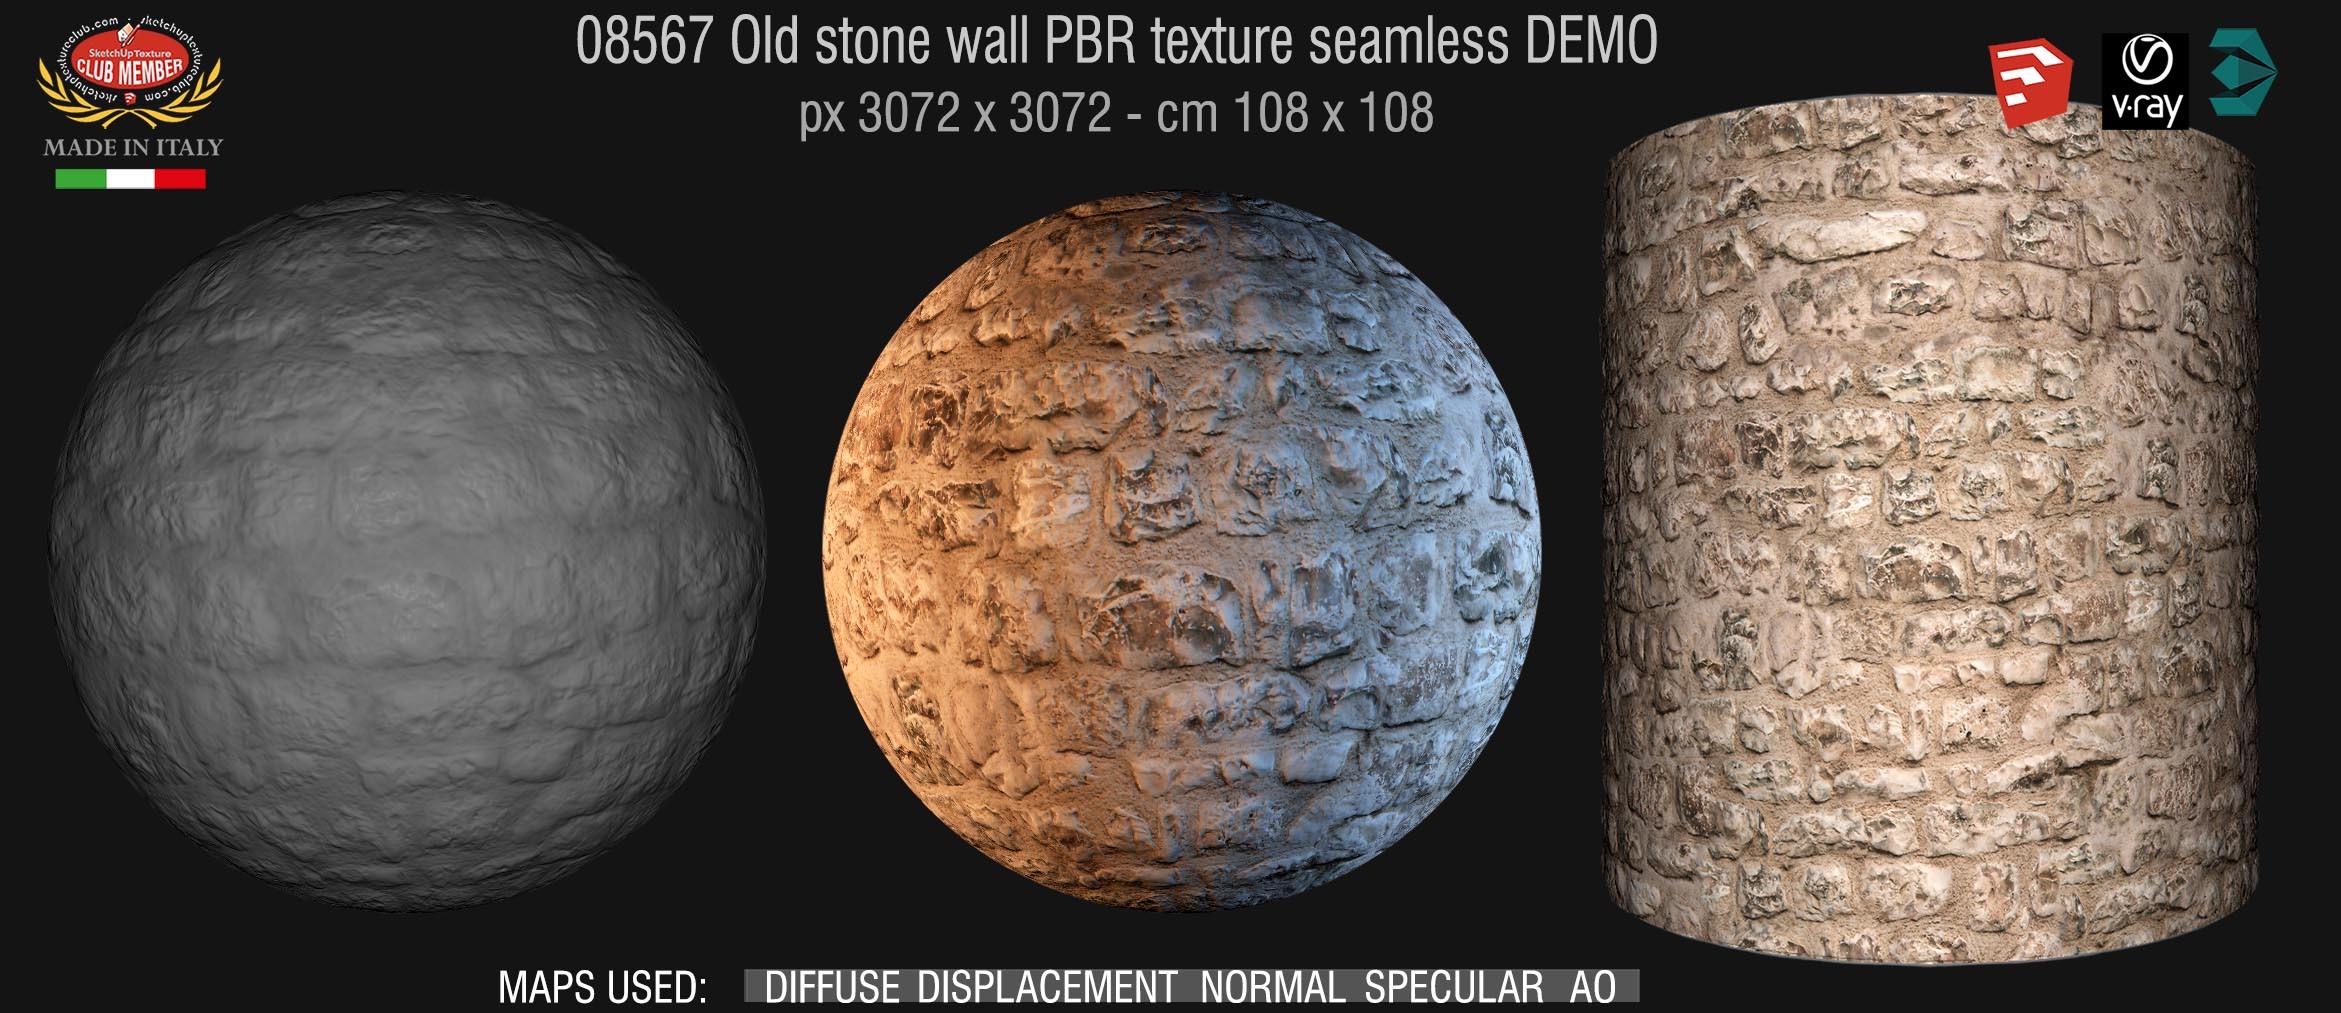 08567 Old stone wall PBR texture seamless DEMO